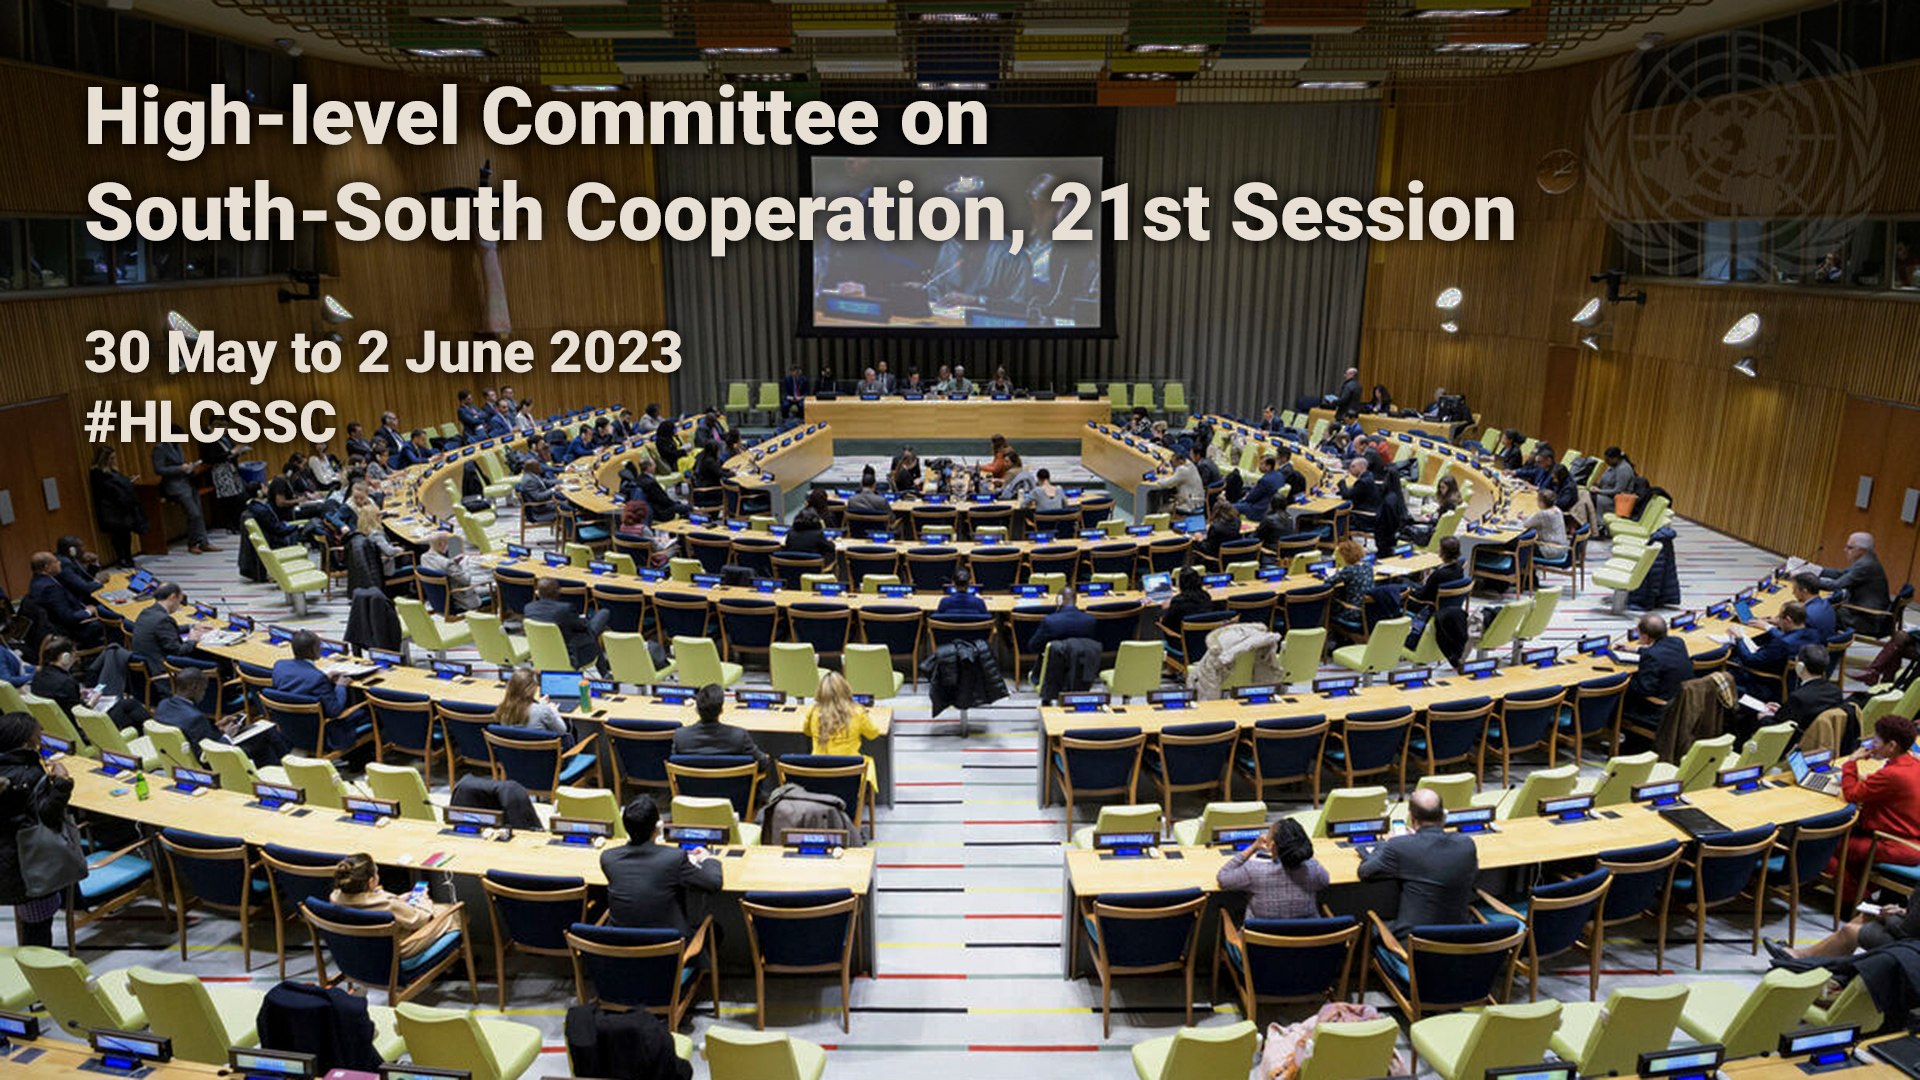 ACSH’s experience was presented at the 21st Session of the UN High-Level Committee on South-South Cooperation